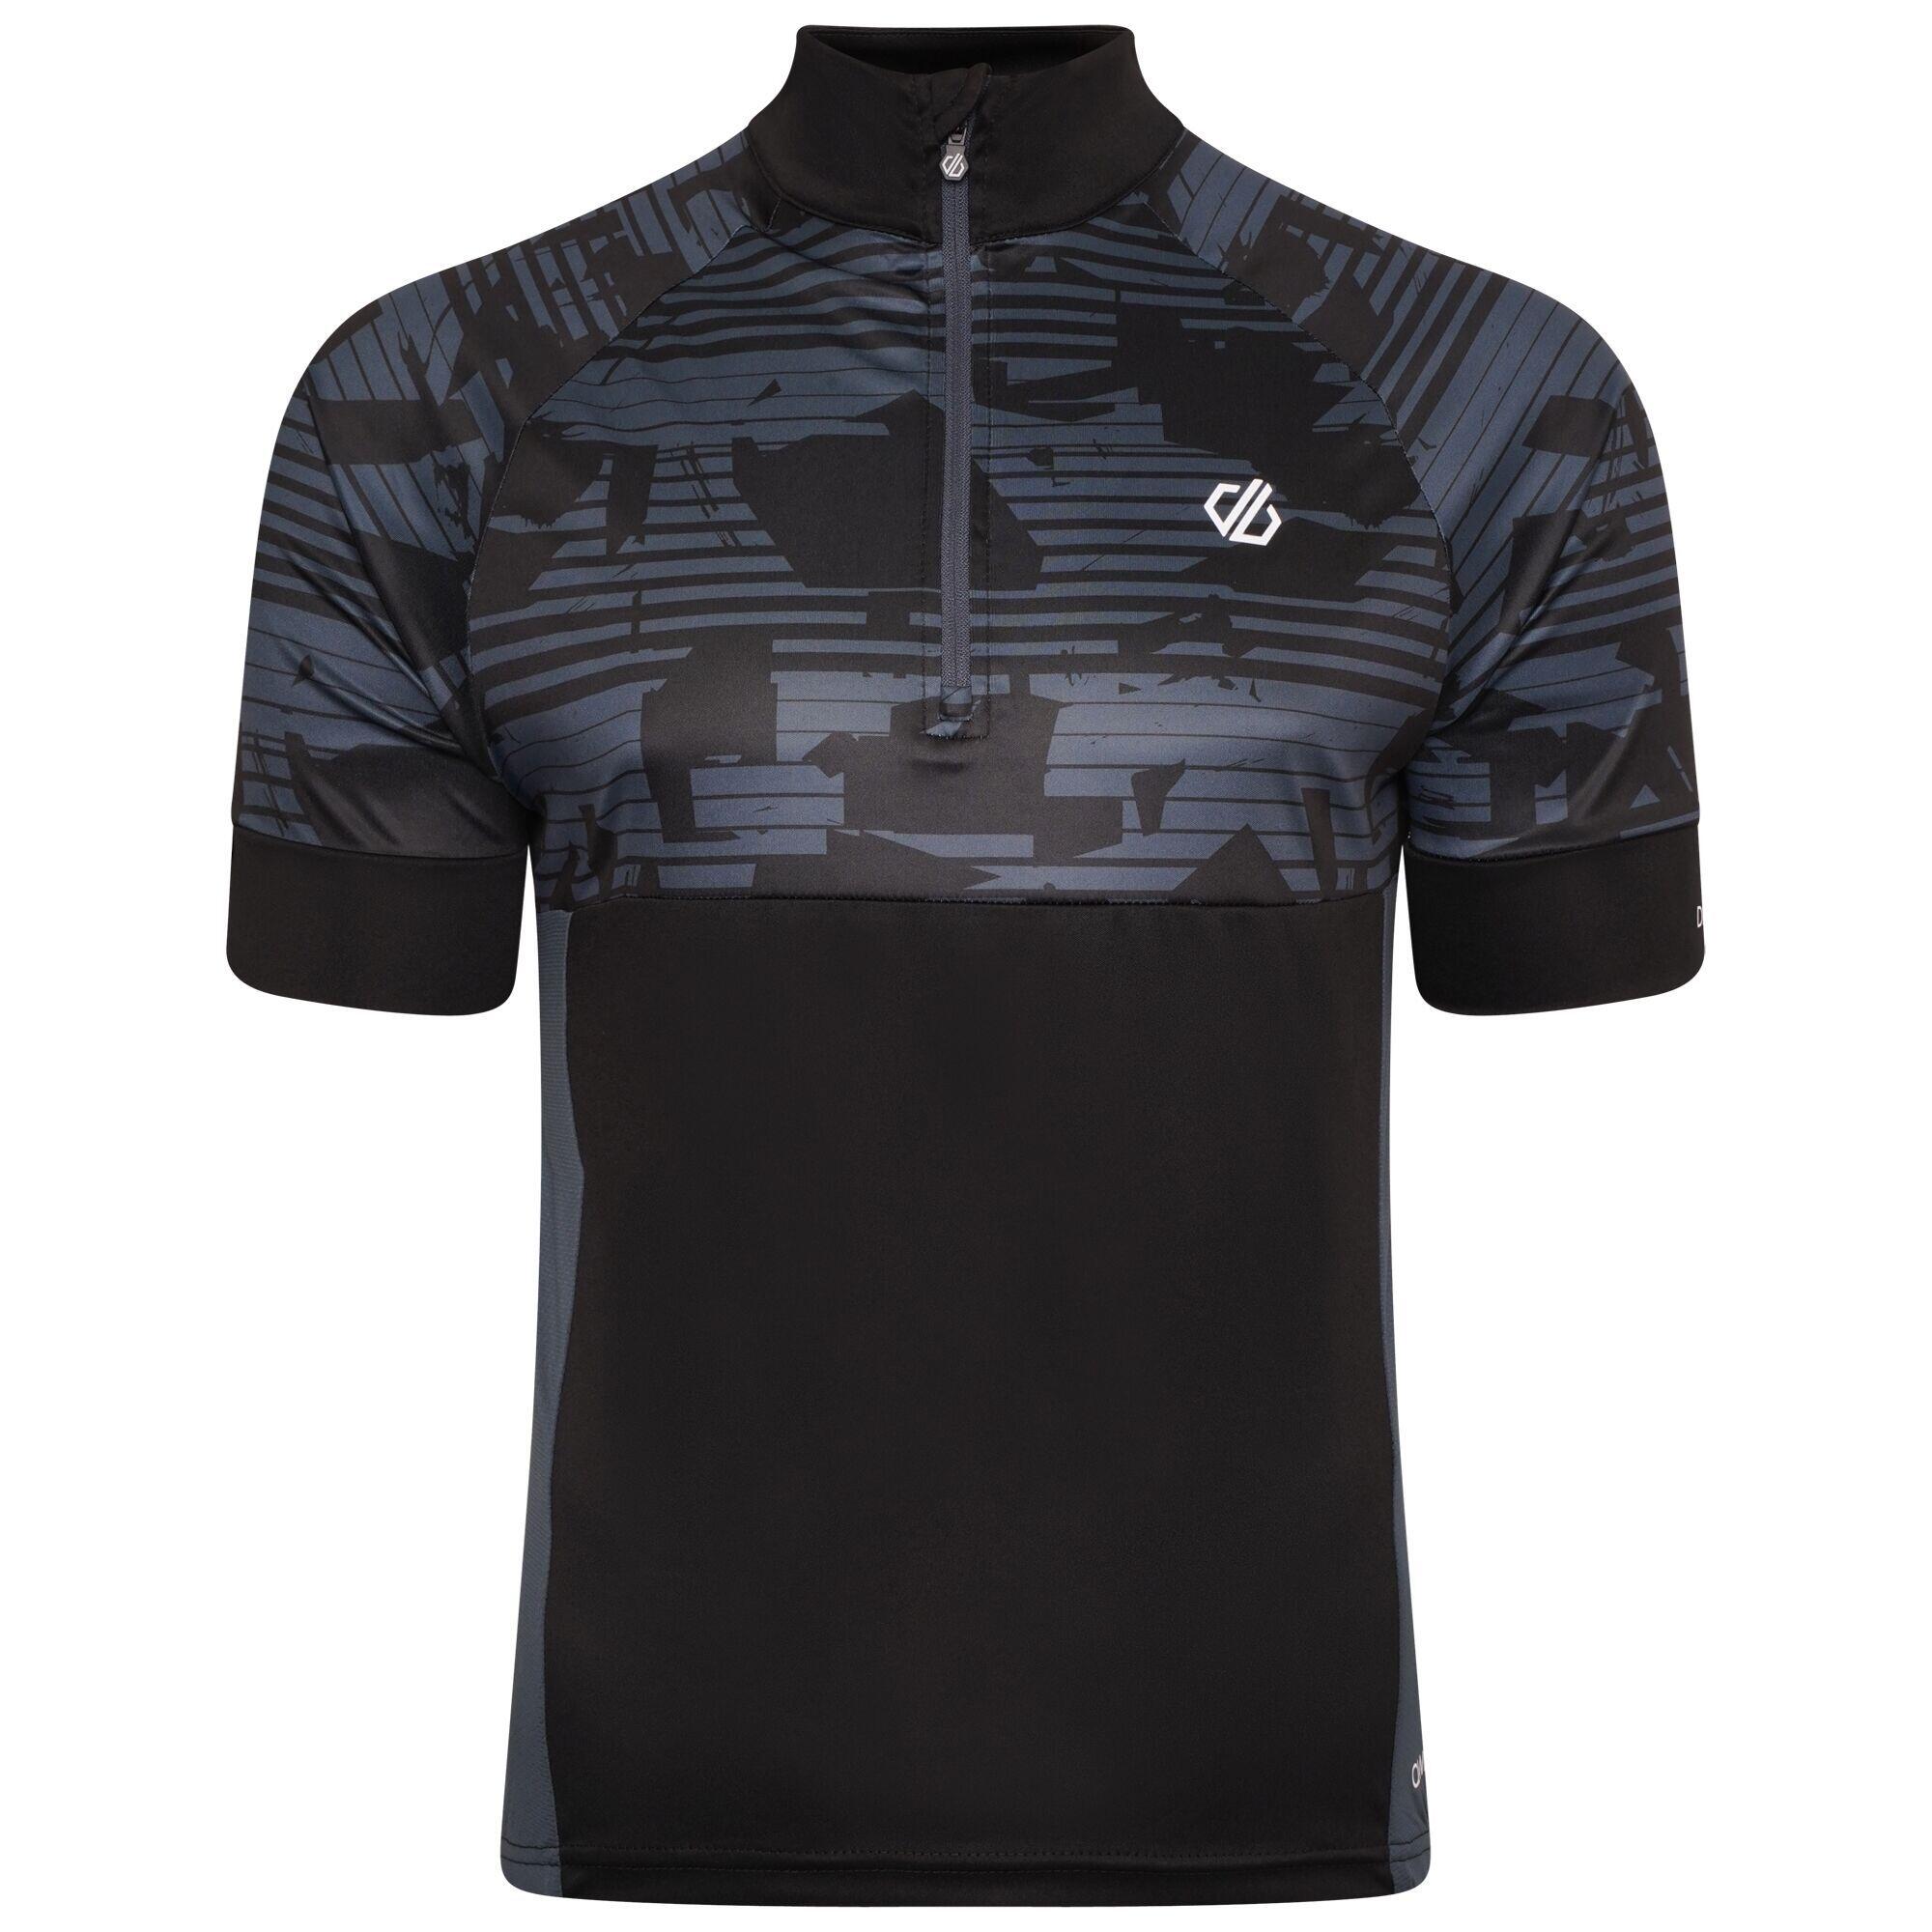 Mens Stay The Course II Downshift Print Cycling Jersey (Black) 1/5